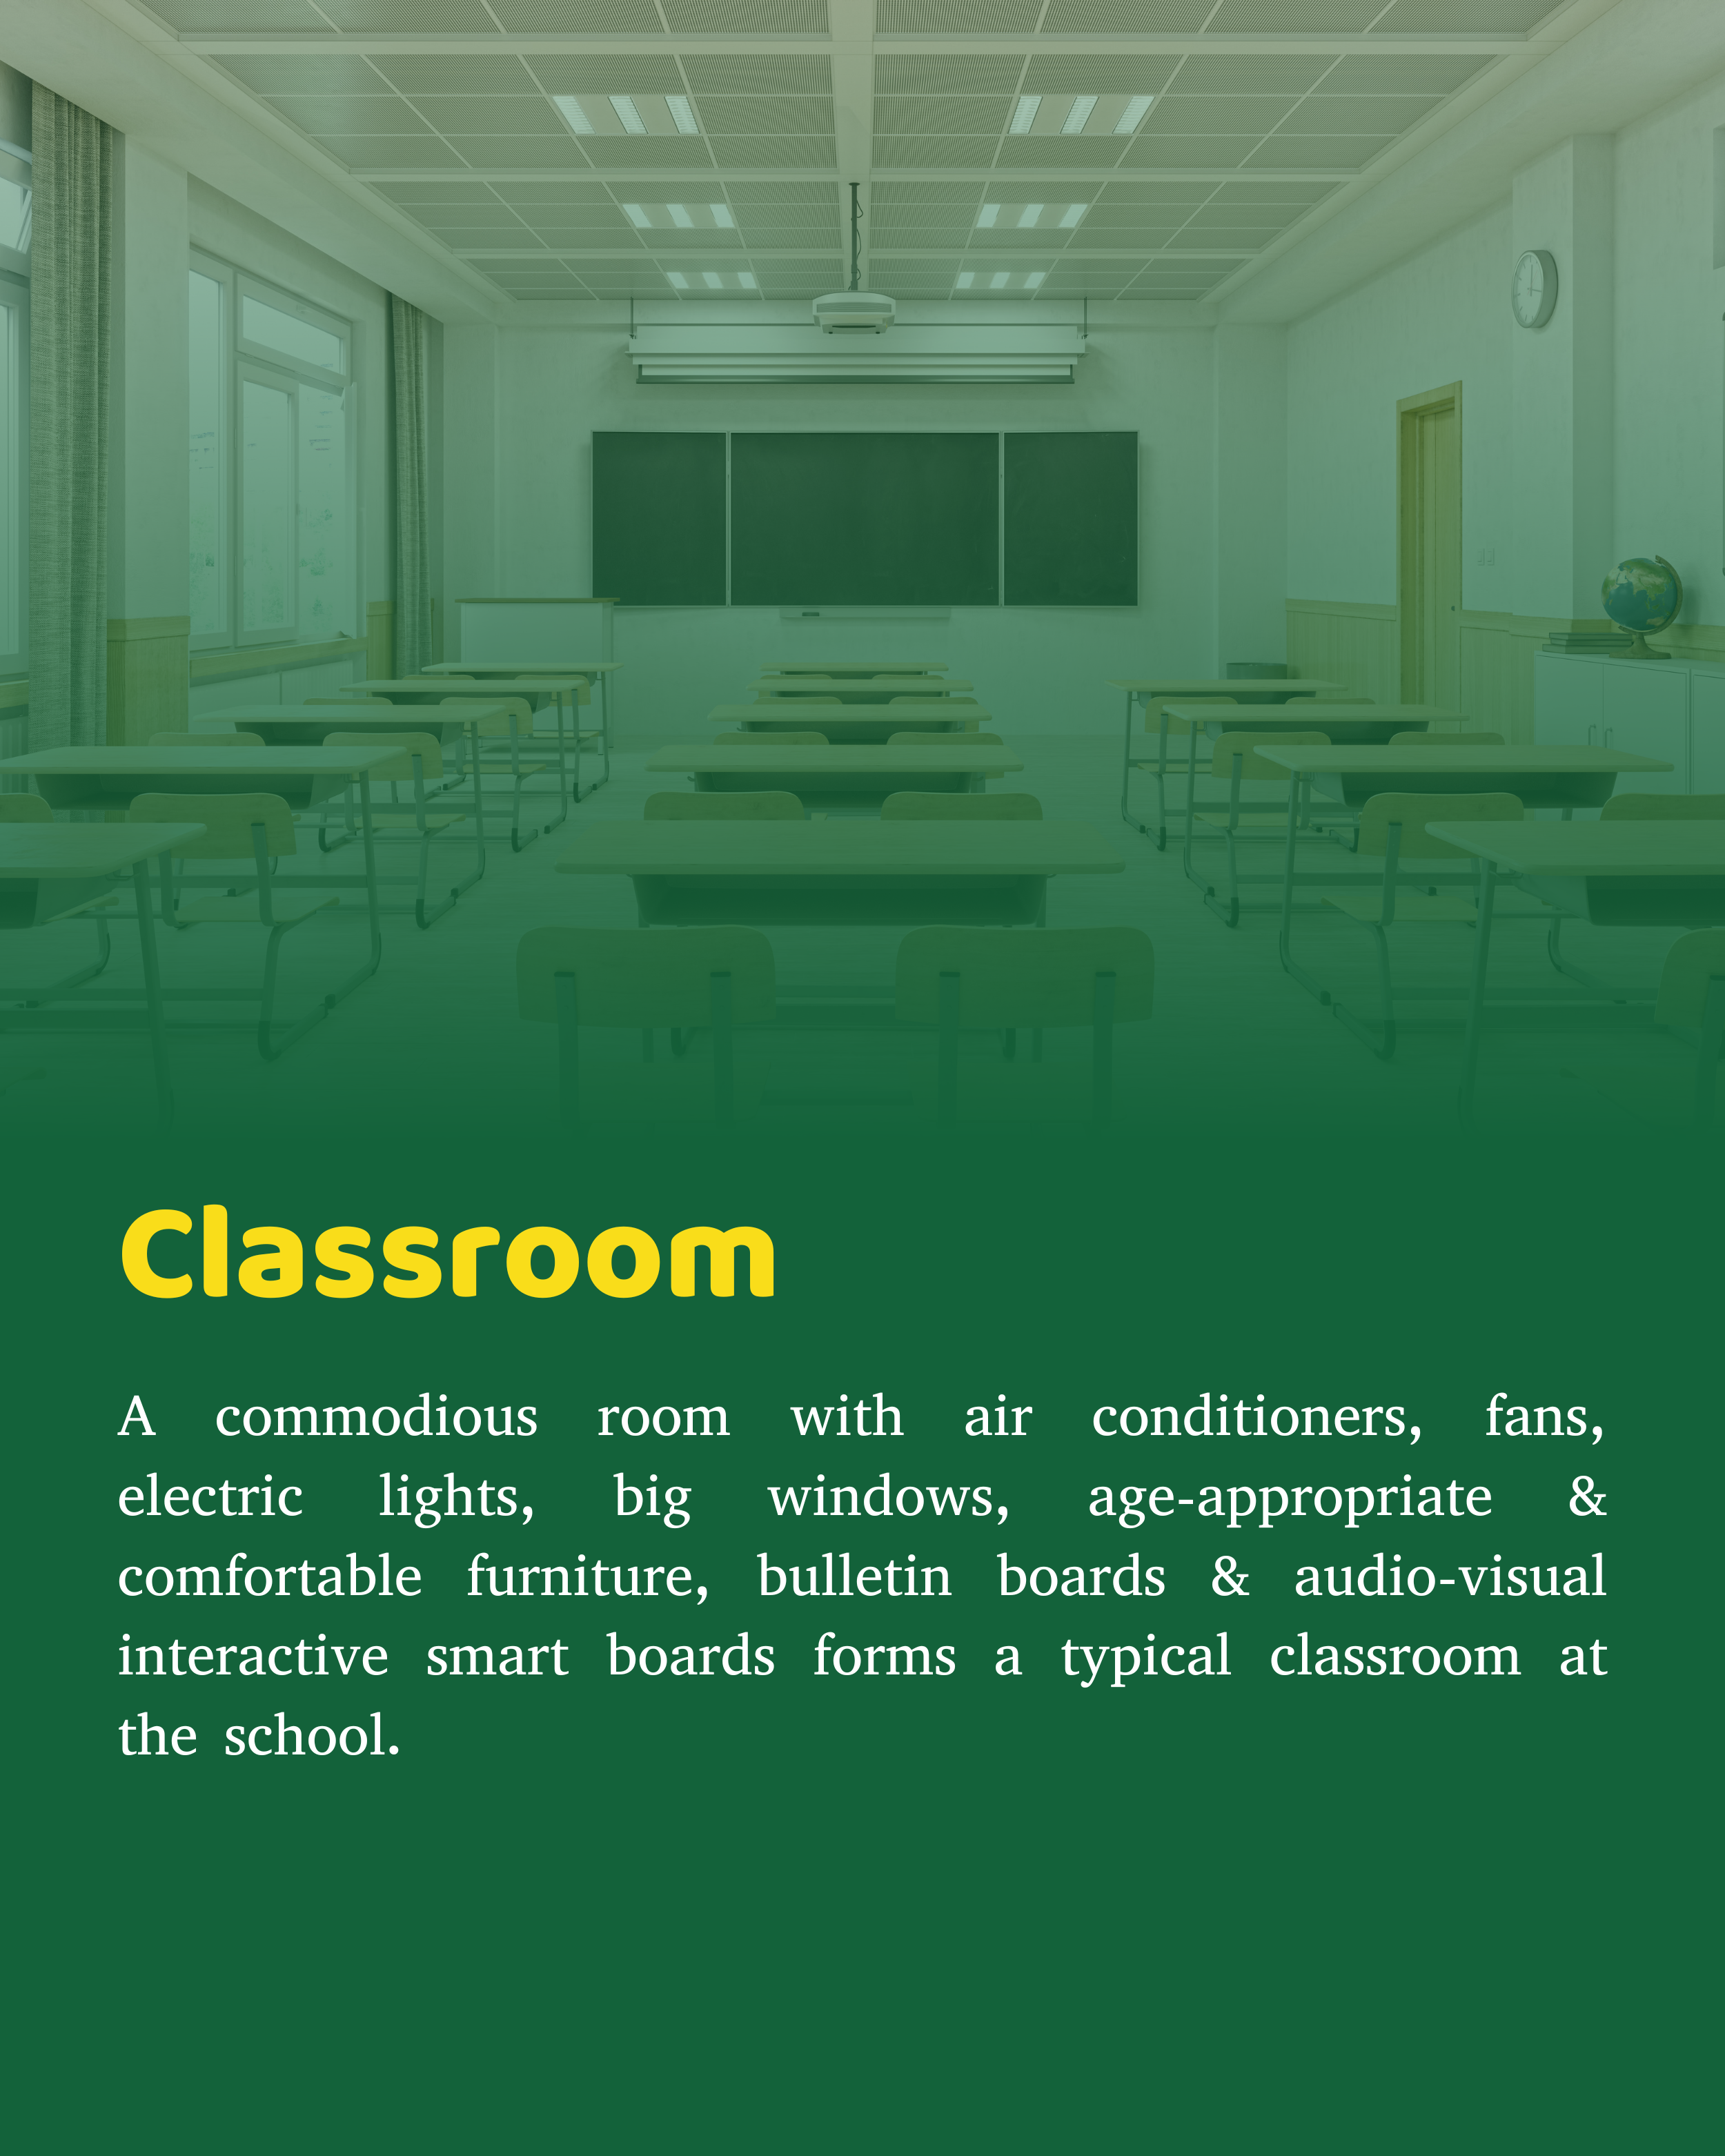 Commodious room with air conditioners, fans, electric lights, big windows, age appropriate & comfortable furniture, bulletin boards & Audio- Visual interactive smart boards form a typical classroom at the school.